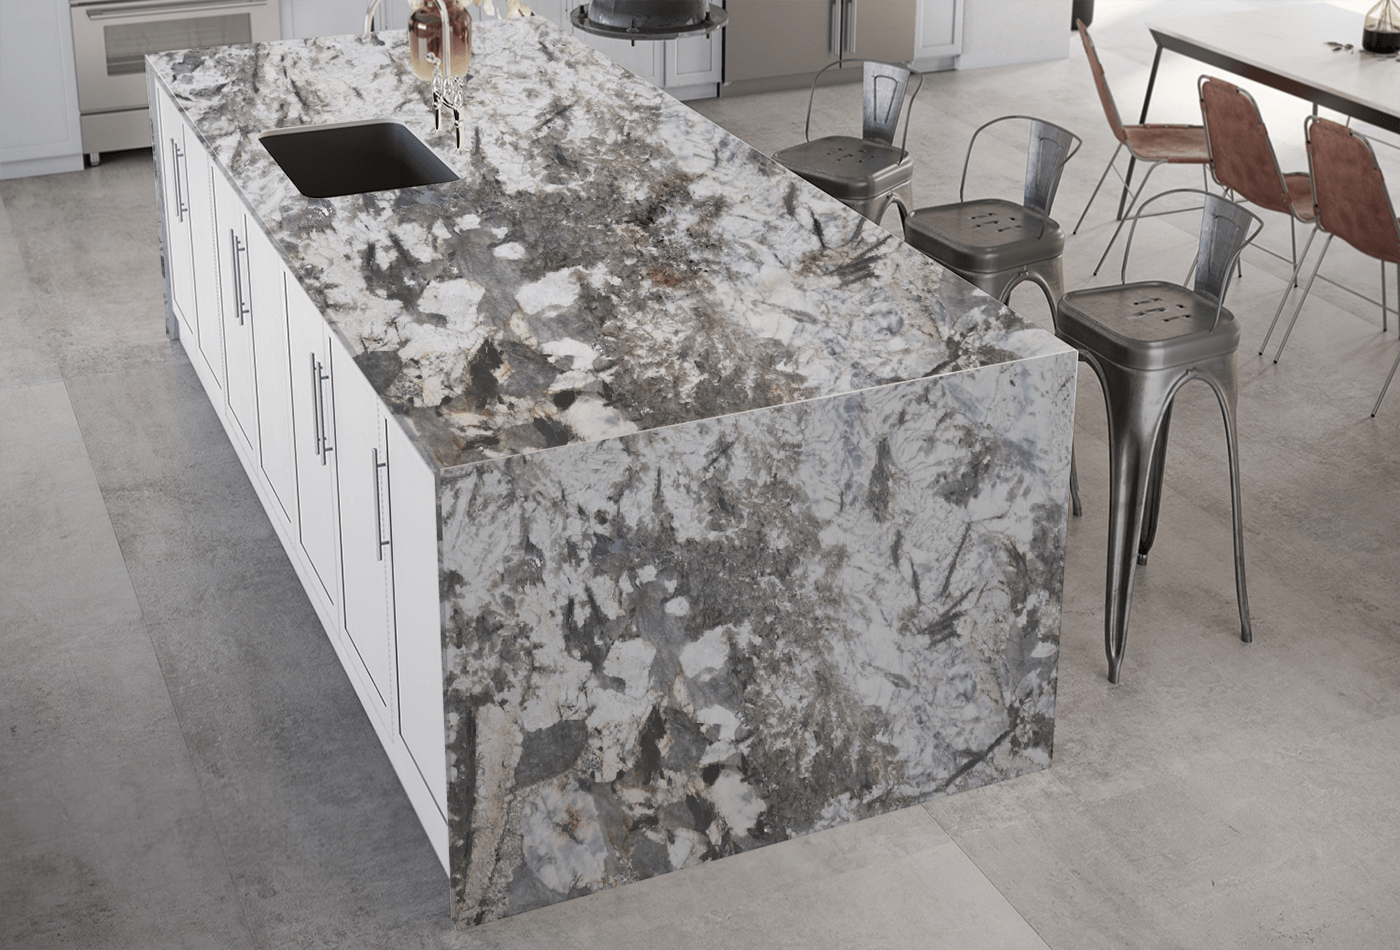 What if You Install these Granite Surfaces onto Your Countertop